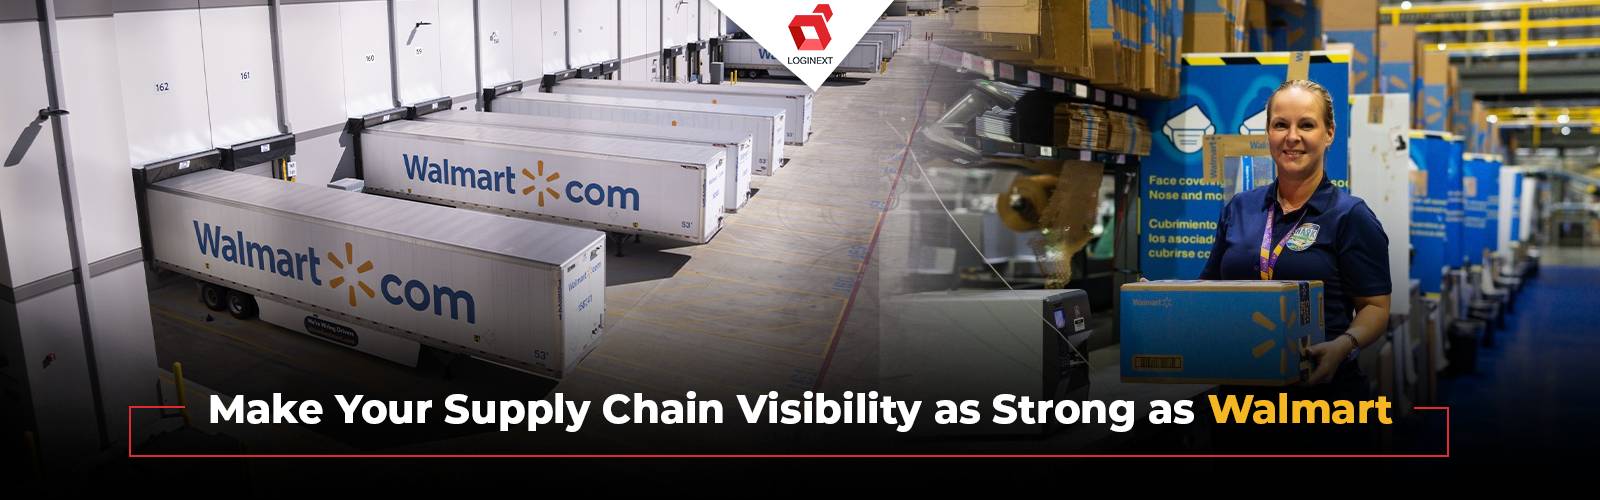 Supply Chain Visibility Software used by Walmart